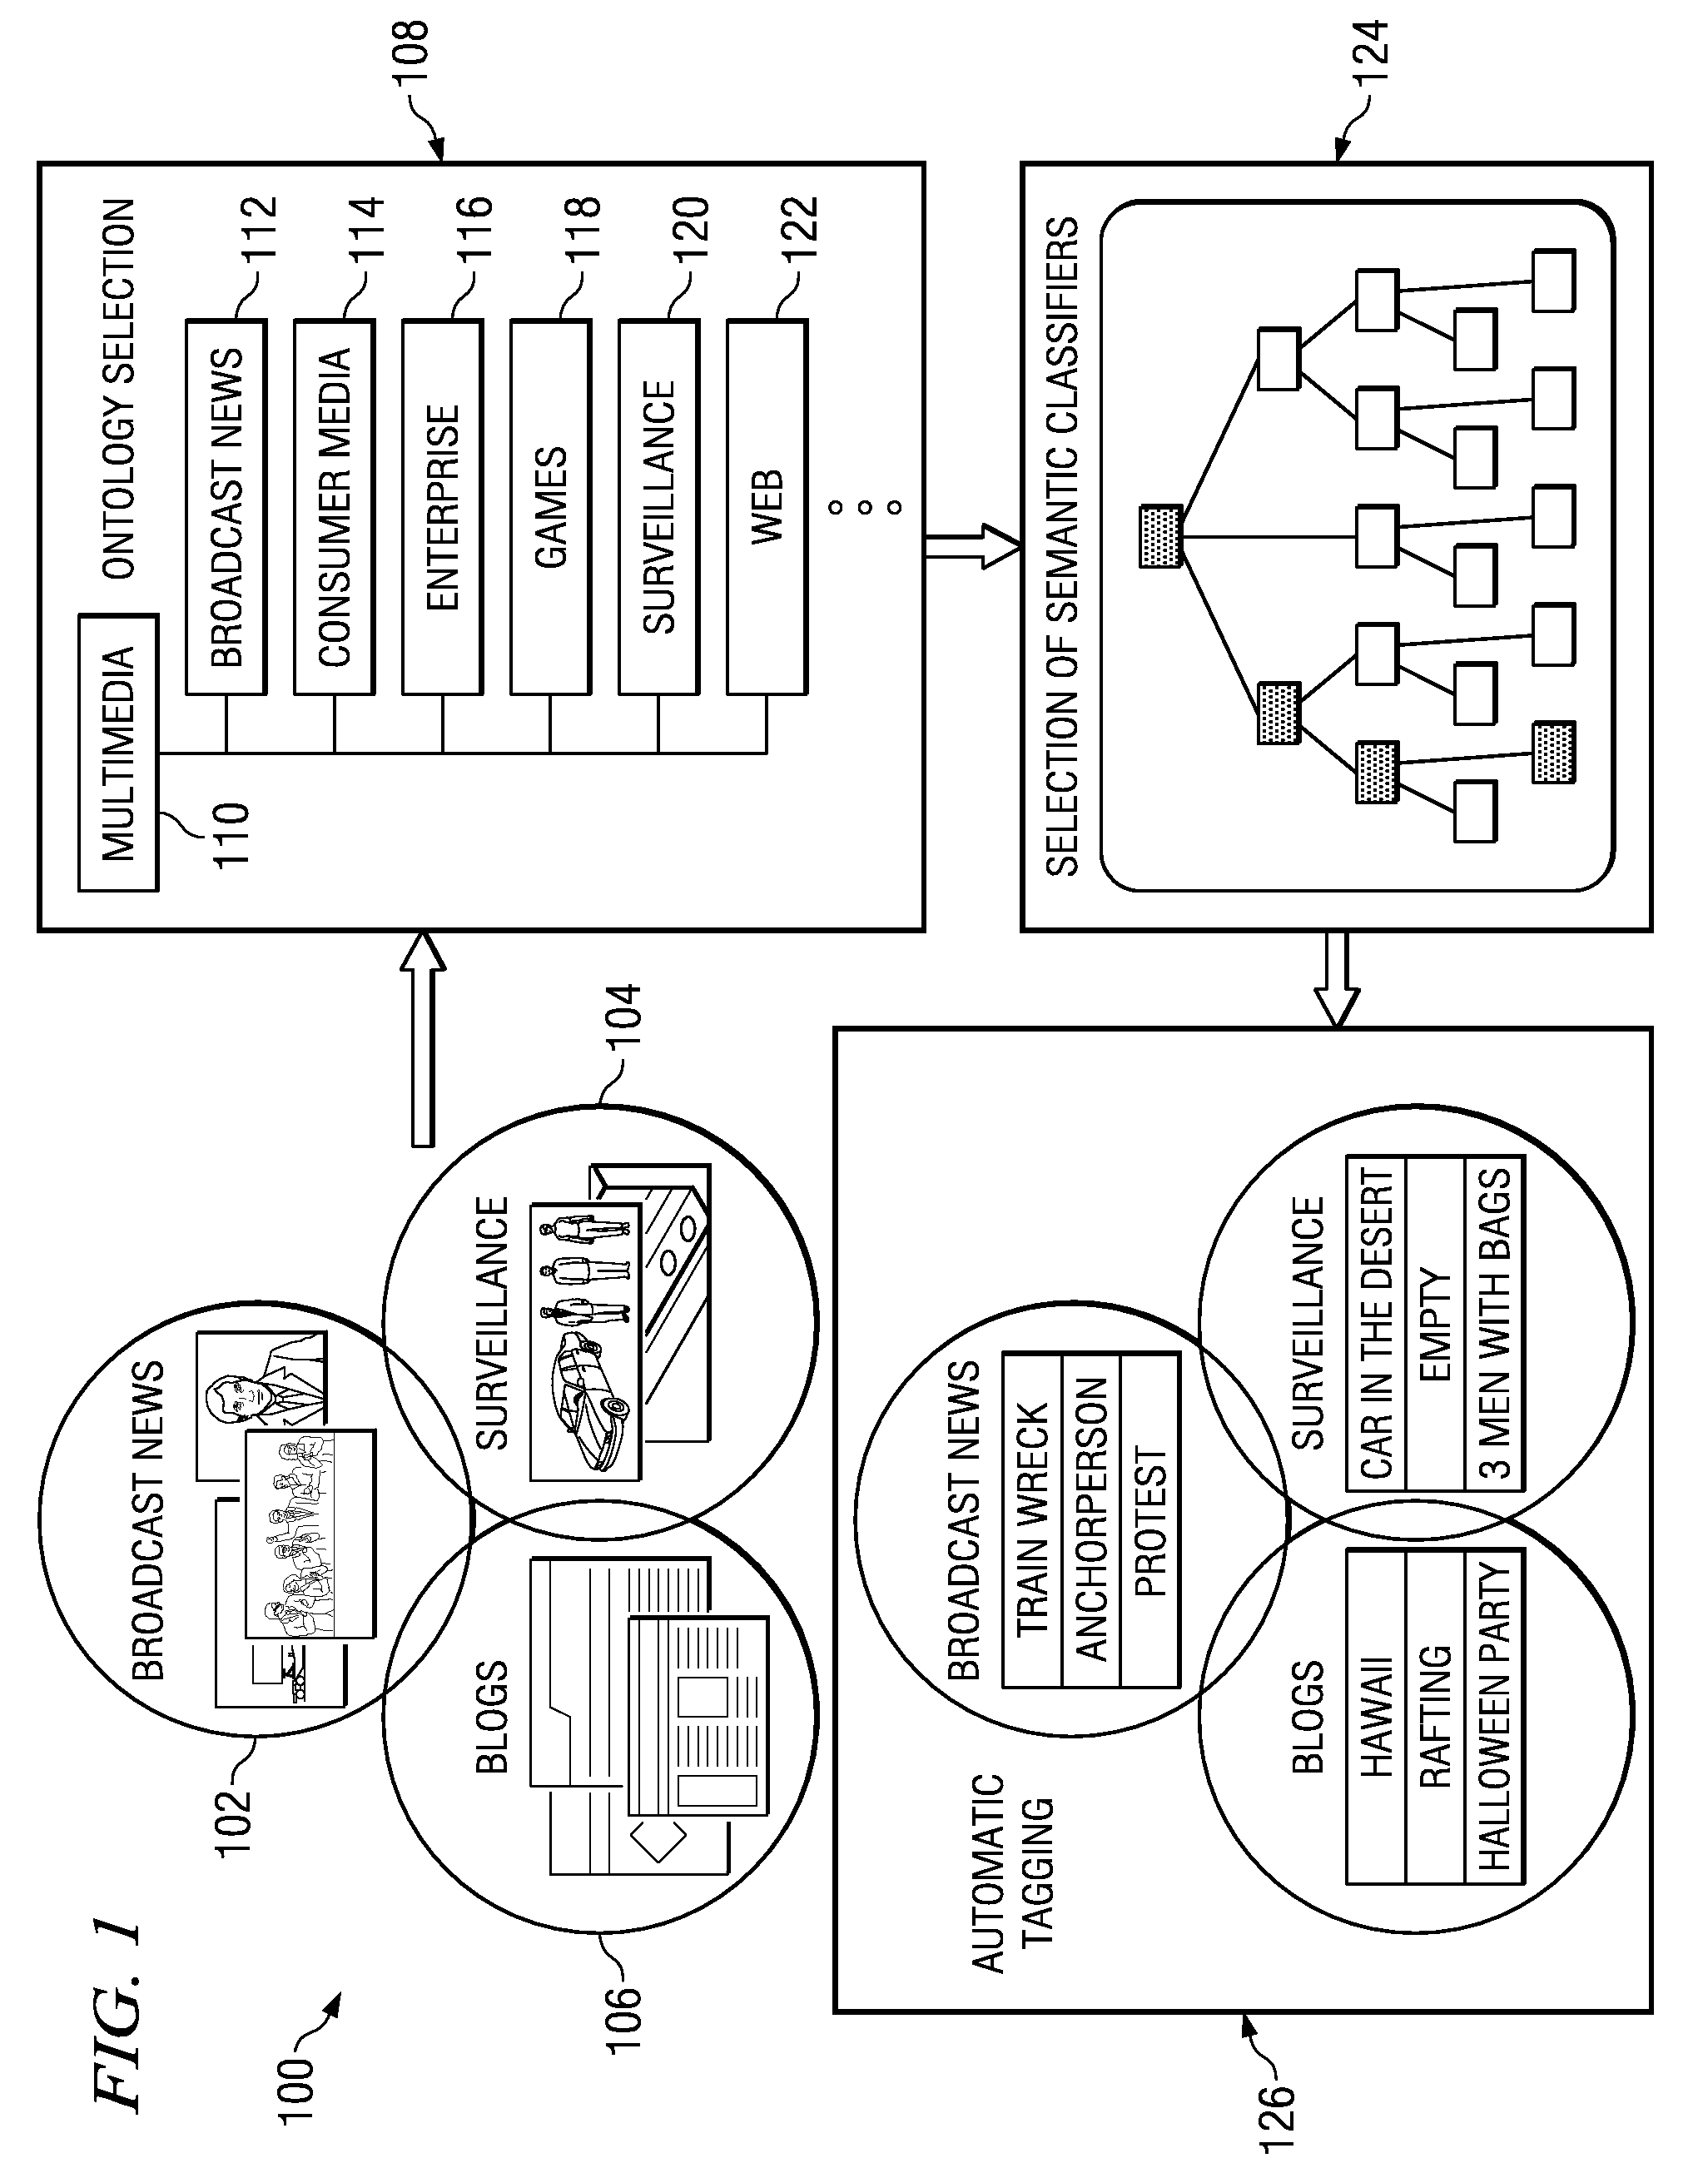 Method and apparatus for classifying multimedia artifacts using ontology selection and semantic classification